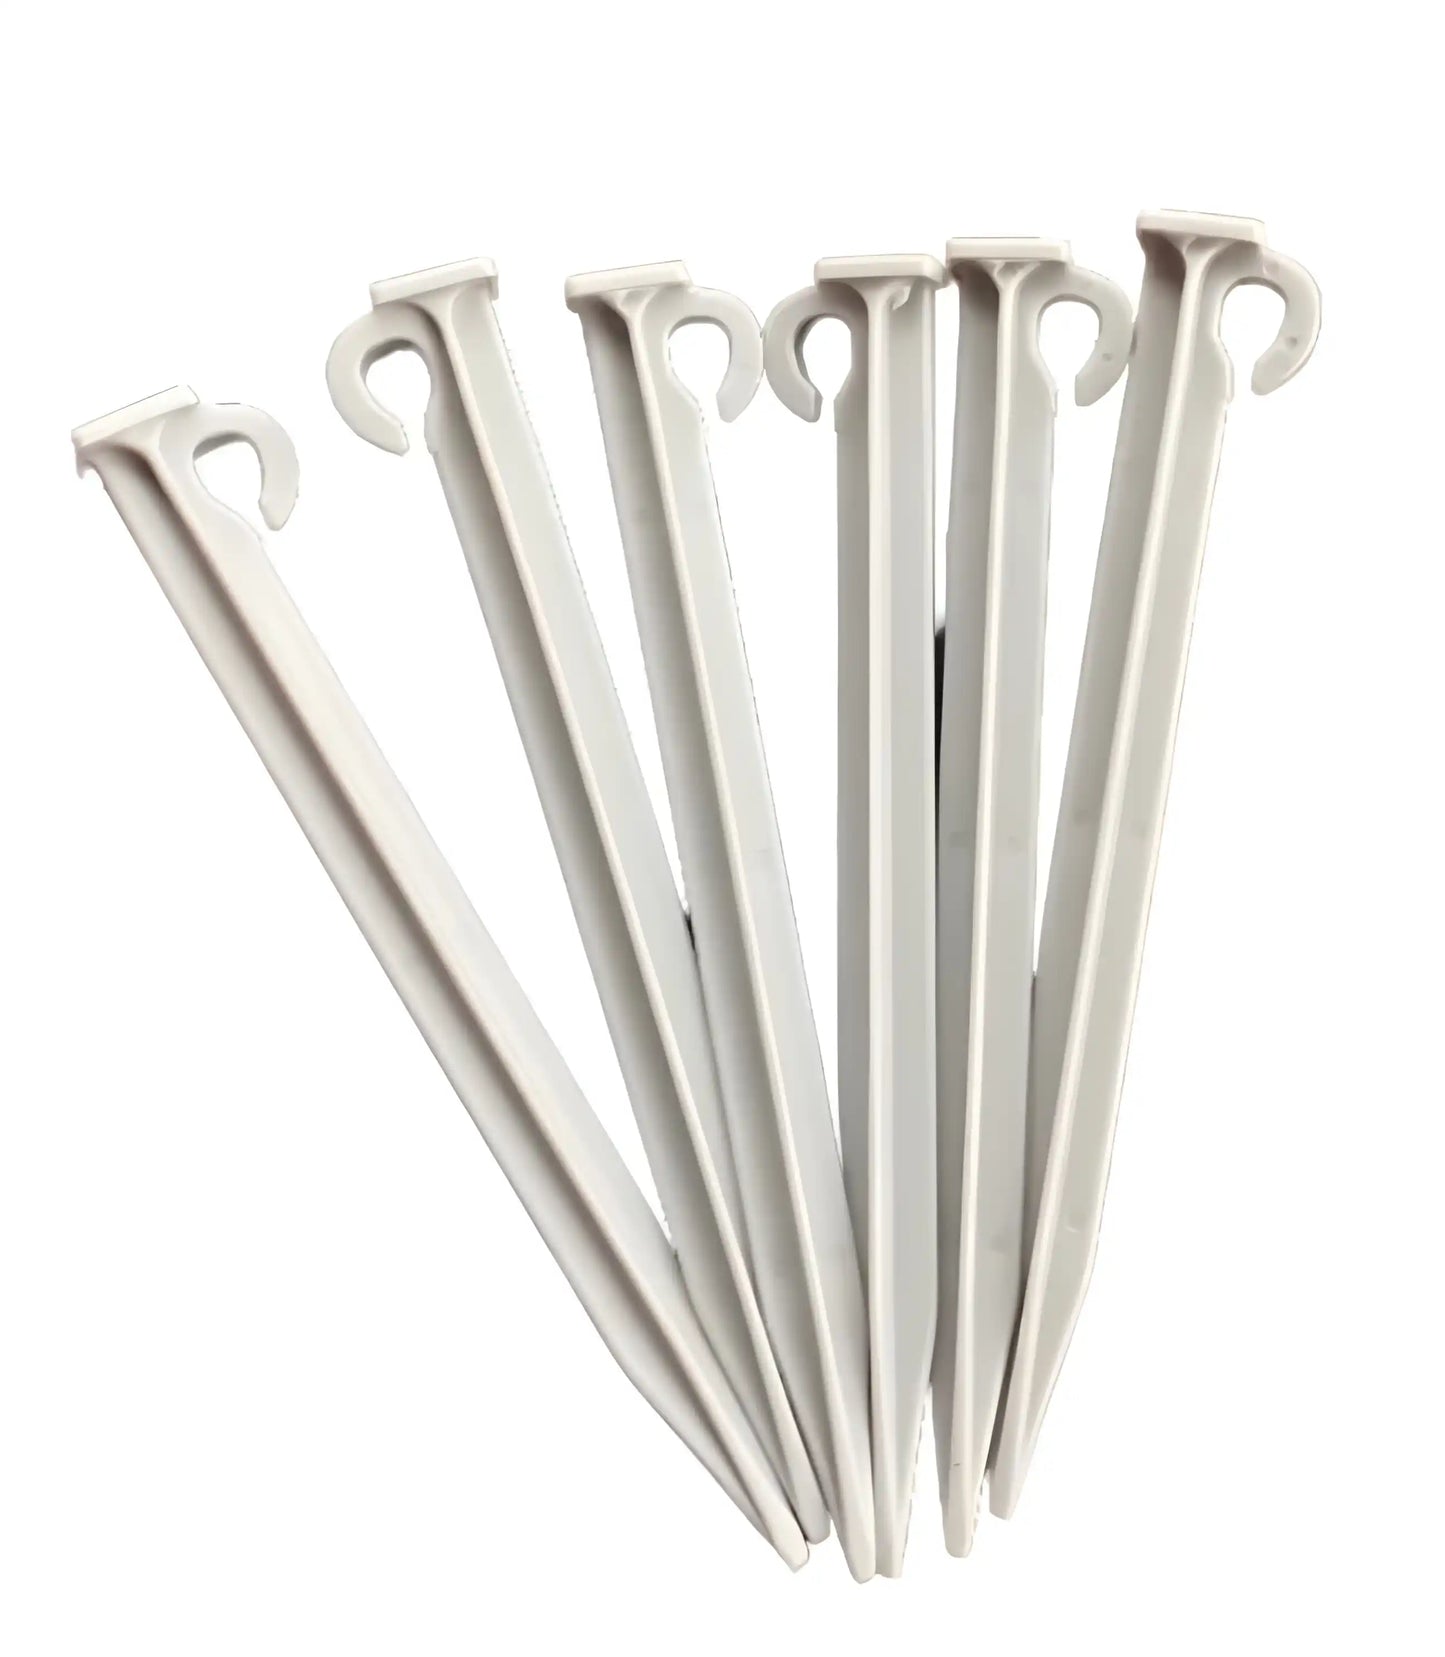 Tent pegs (stakes) to anchor bounce house when used outdoor